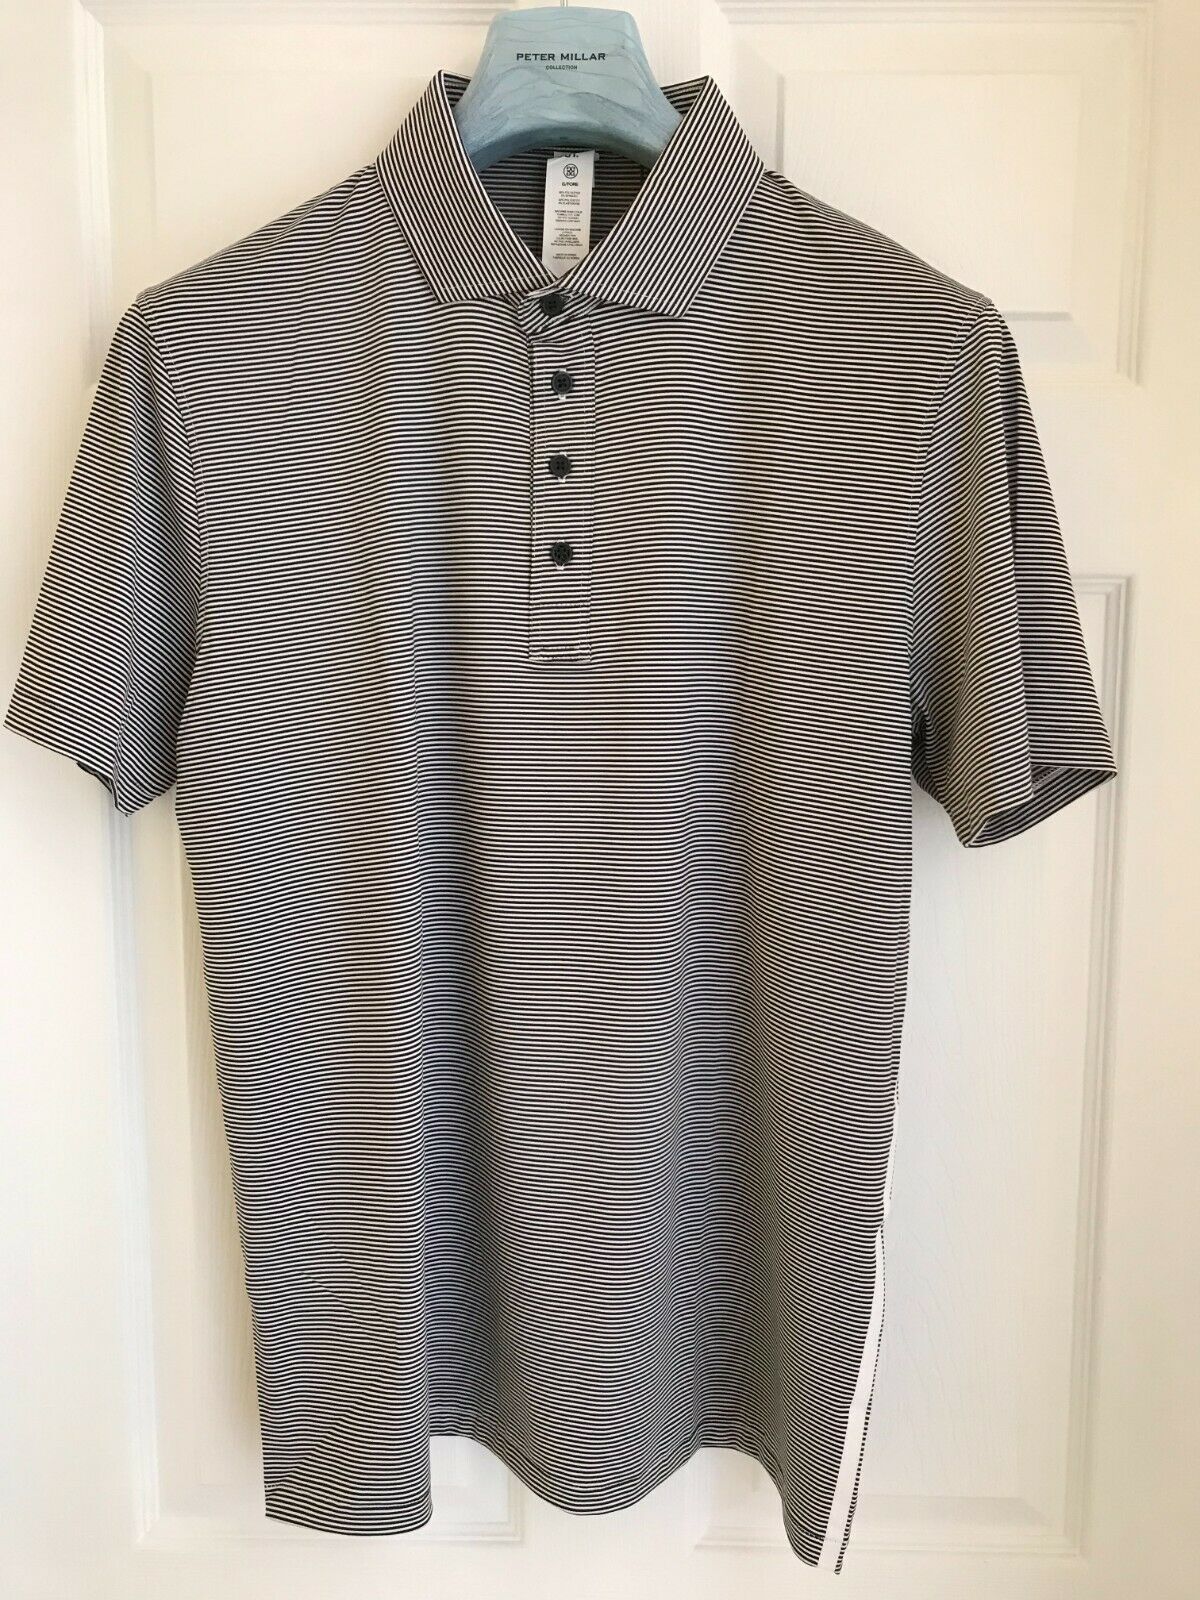 Nwt~g/fore Men's Core Feeder Stripe Polo ~ Black & White~ Large~ Very Cool! $115